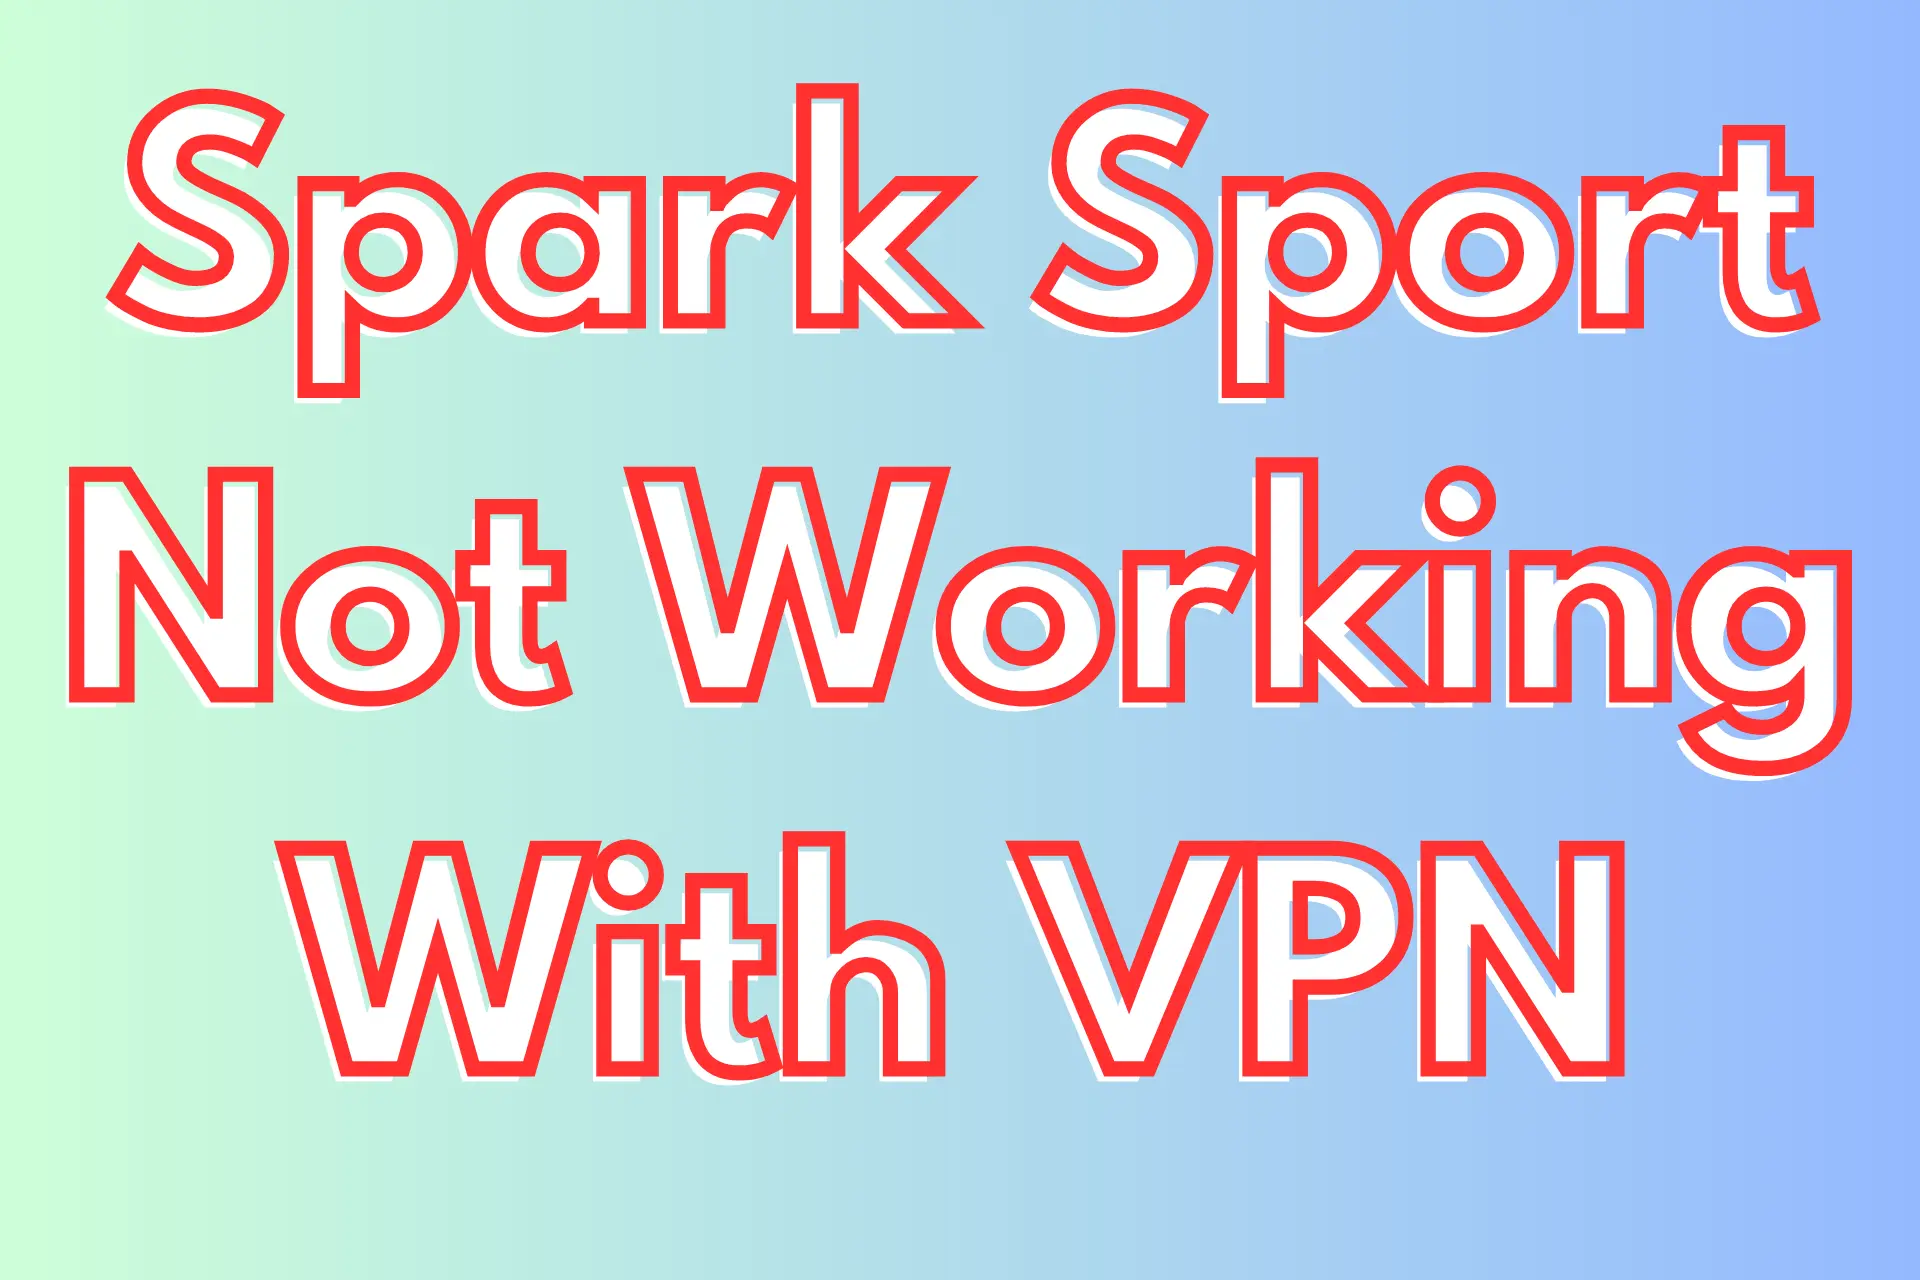 Spark Sport not working with VPN